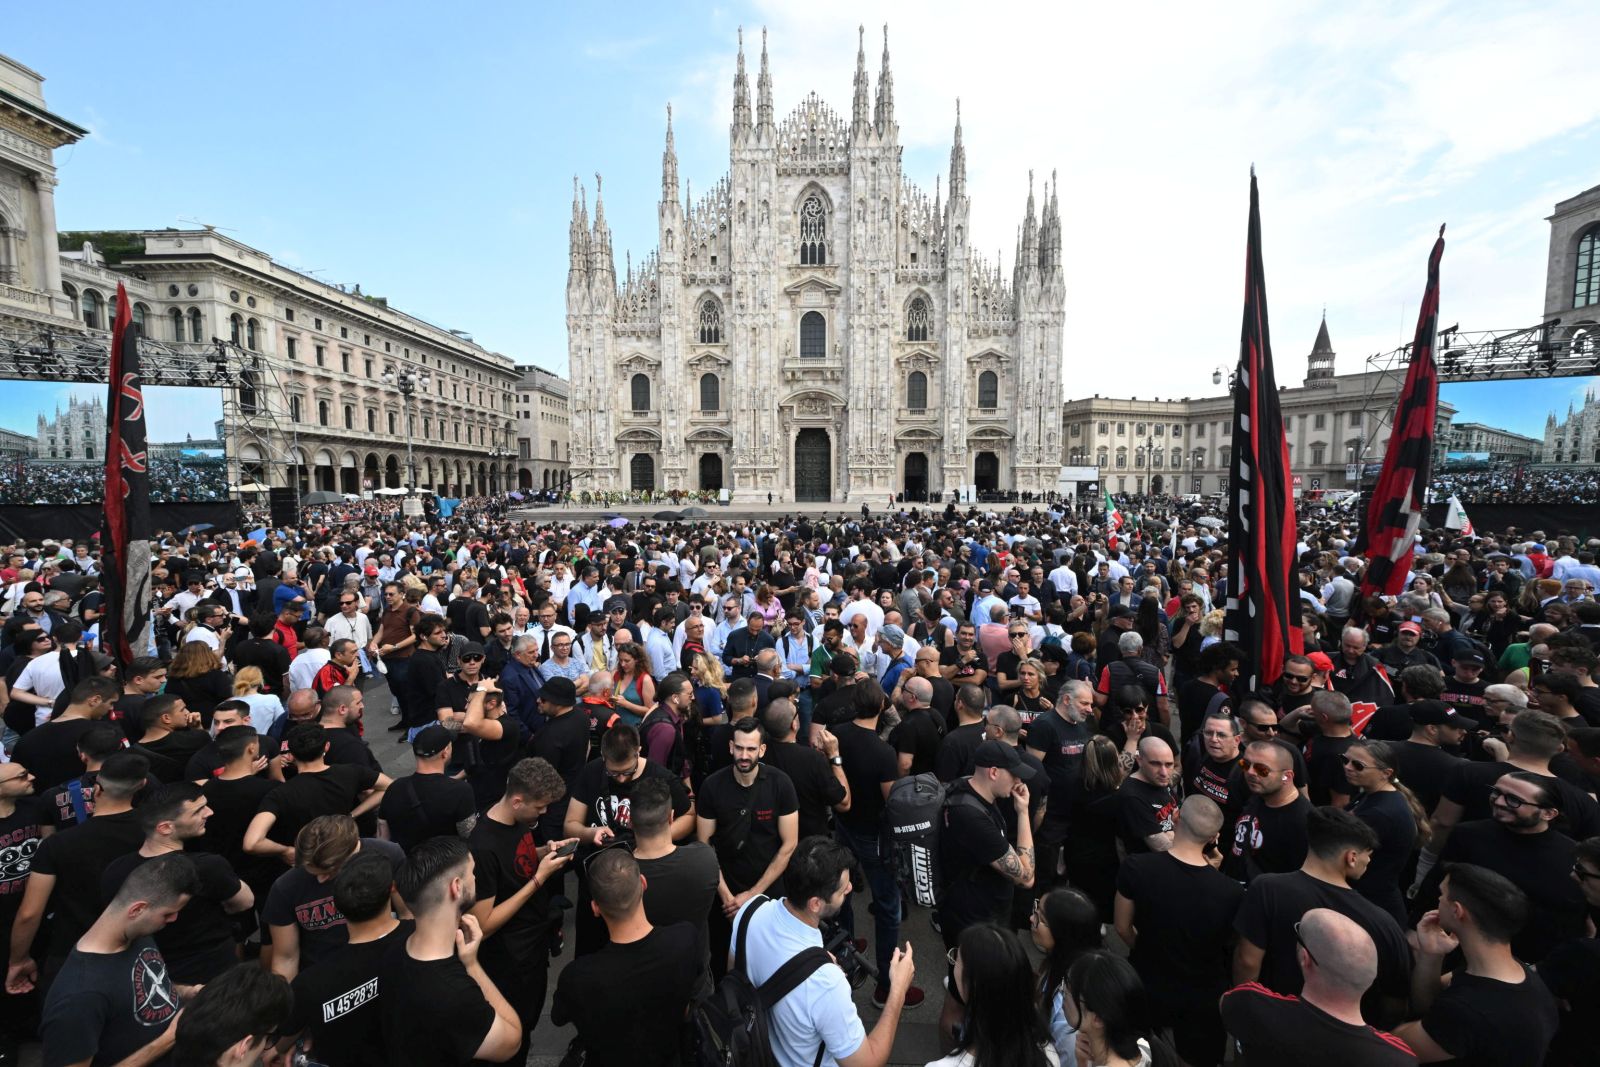 epa10690375 People gather outside the Milan Cathedral (Duomo) ahead of the state funeral for Italy's former prime minister and media mogul Silvio Berlusconi, in Milan, northern Italy, 14 June 2023. Silvio Berlusconi died at the age of 86 on 12 June 2023 at Milan's San Raffaele hospital. The Italian media tycoon and Forza Italia (FI) party founder, dubbed as 'Il Cavaliere' (The Knight), served as prime minister of Italy in four governments. The Italian government has declared 14 June 2023 a national day of mourning.  EPA/CIRO FUSCO